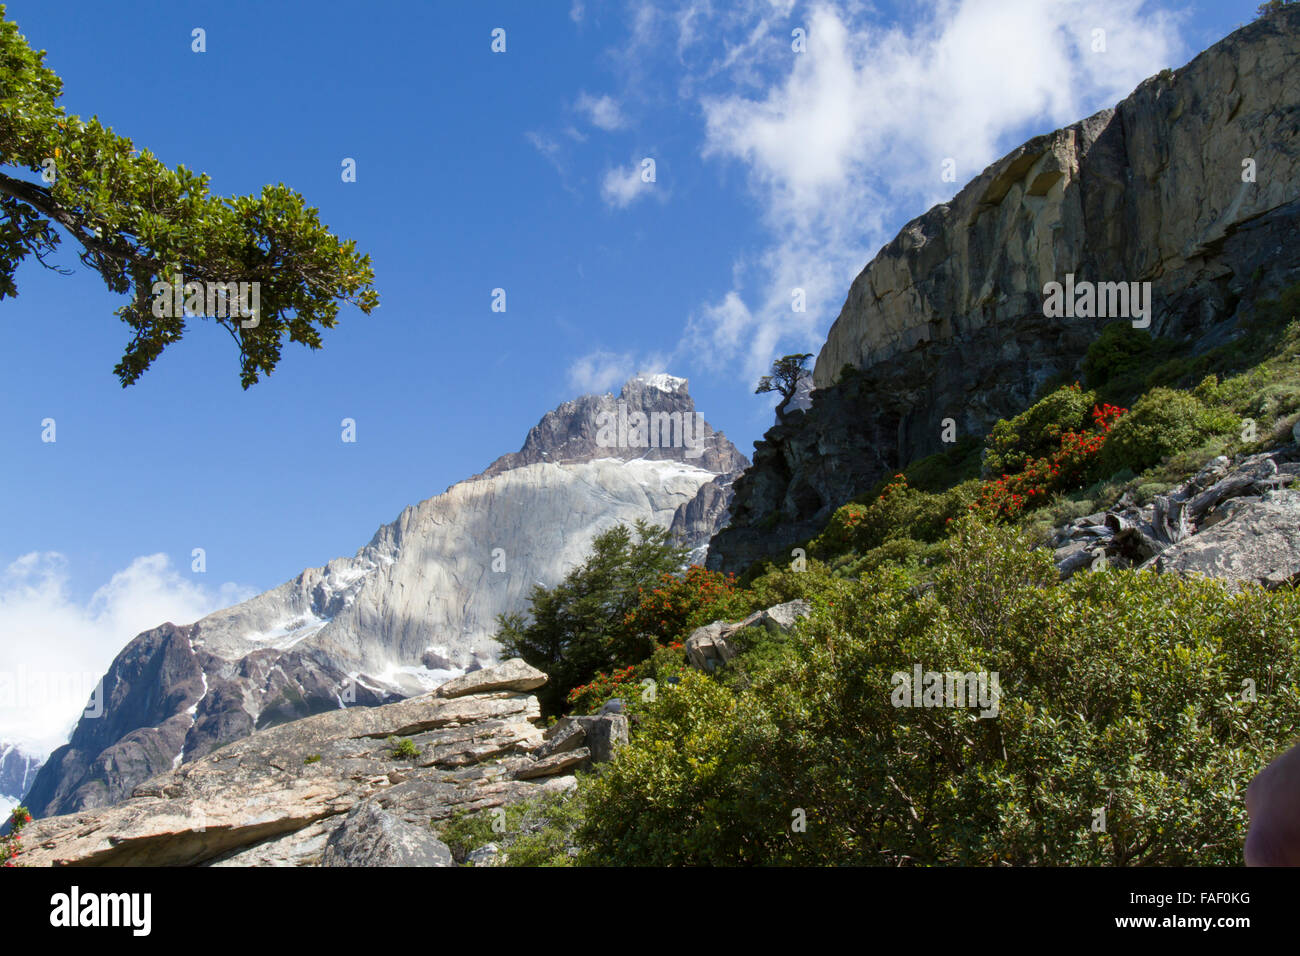 Peaks of Los Cuernos in Torres del Paine, Patagonia, Chile on sunny day. Stock Photo